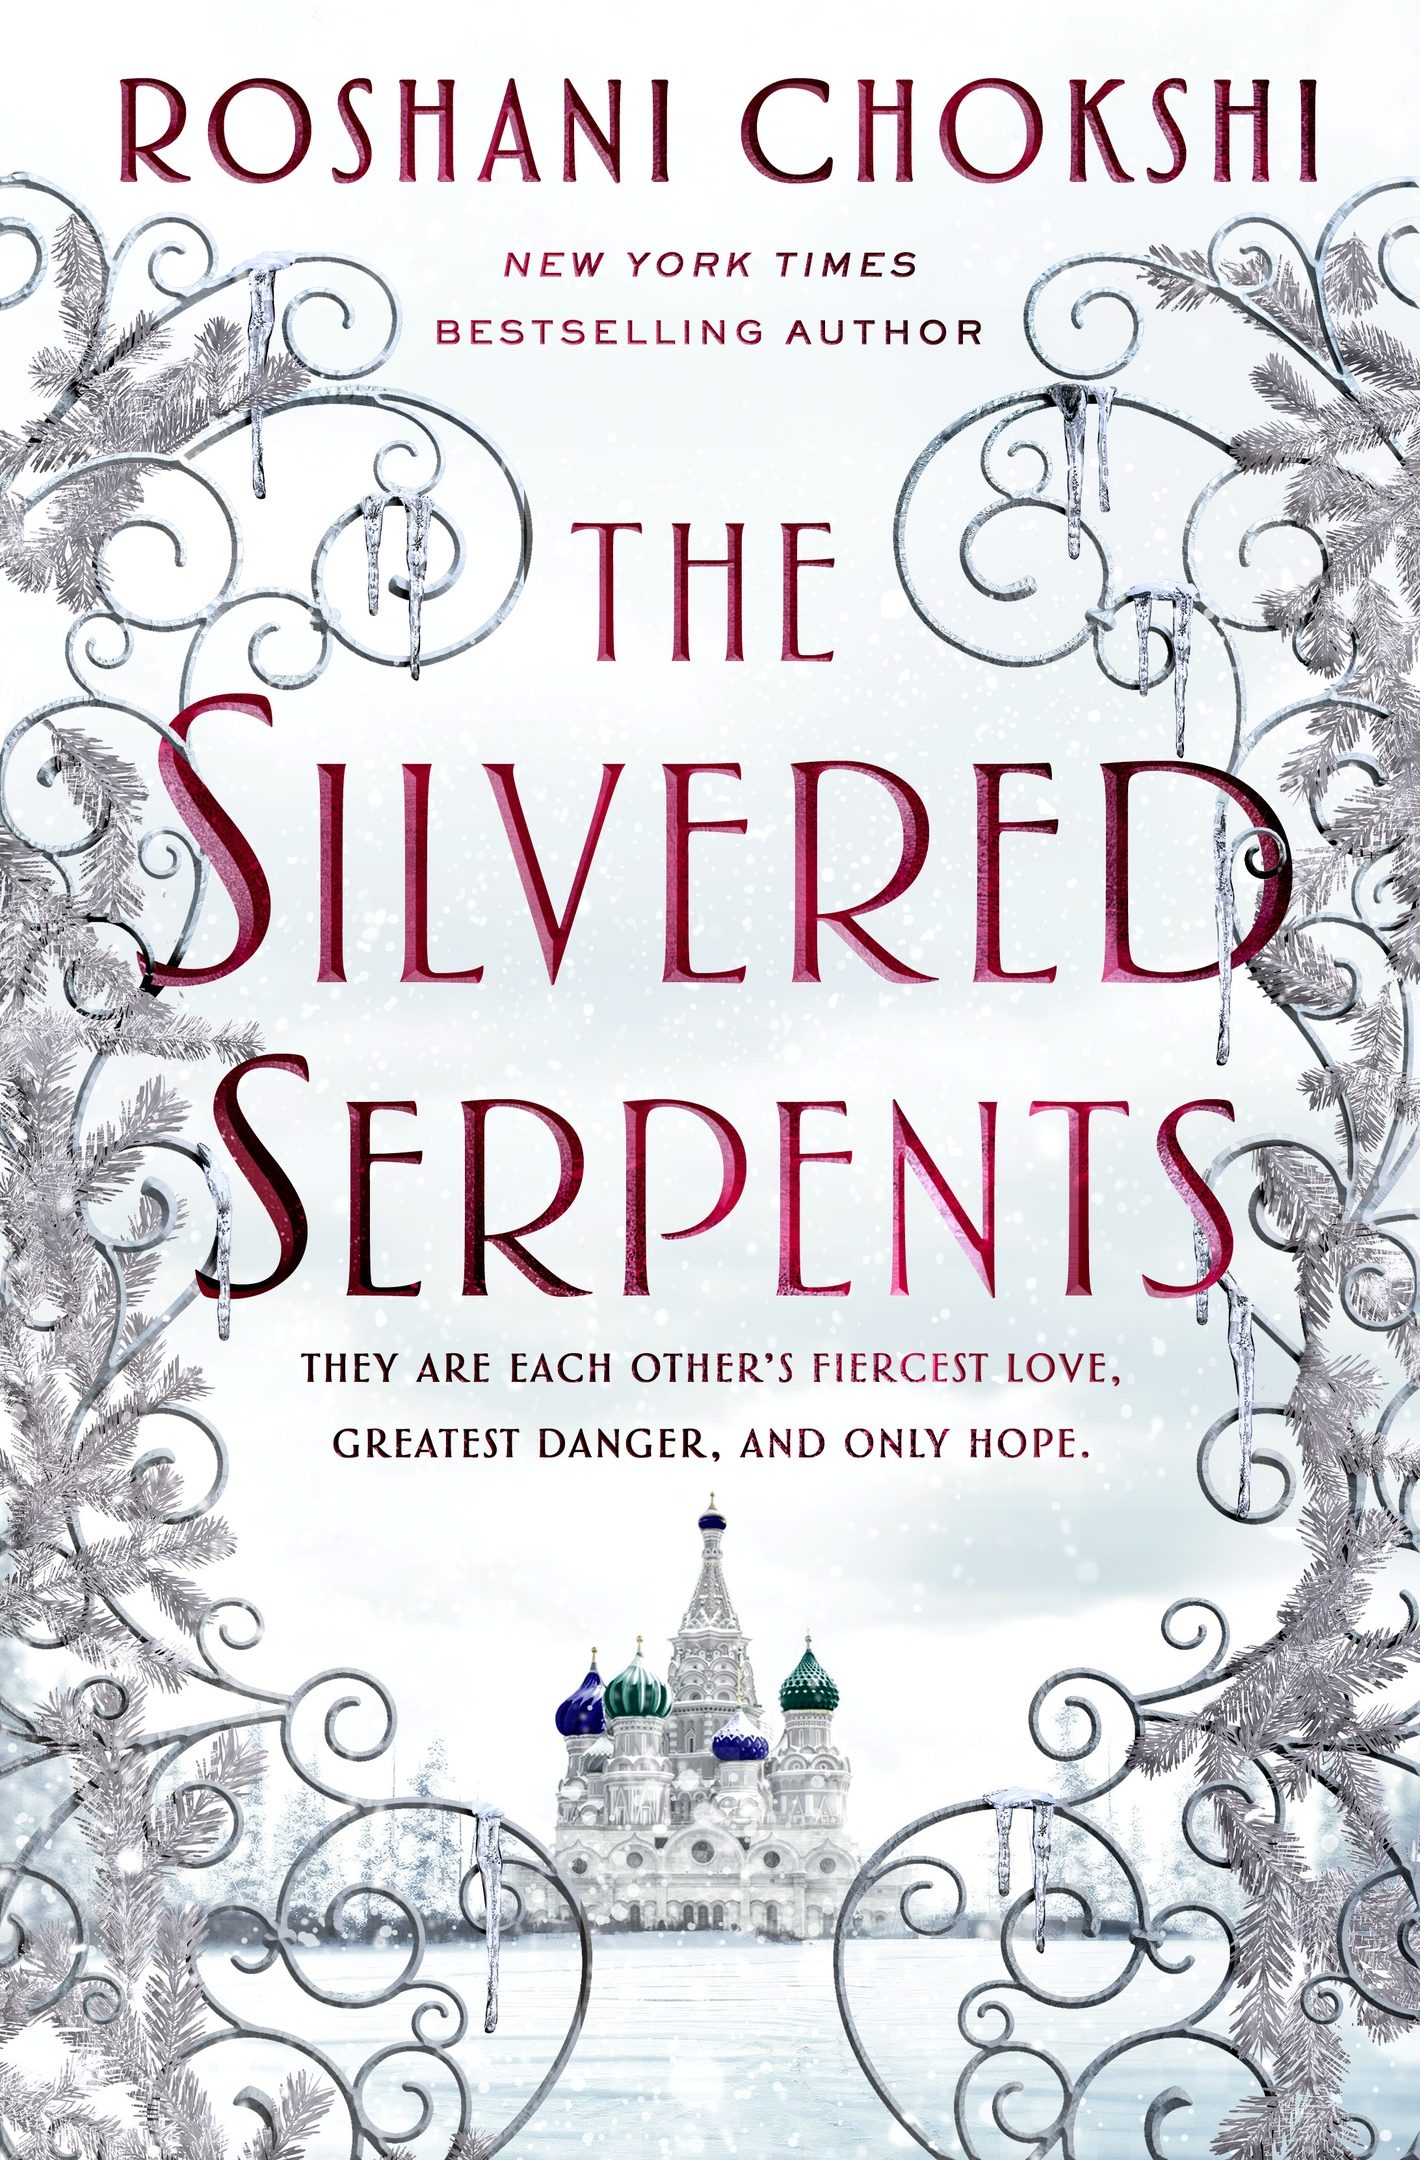 When Does The Silvered Serpents Come Out? 2020 Book Release Dates